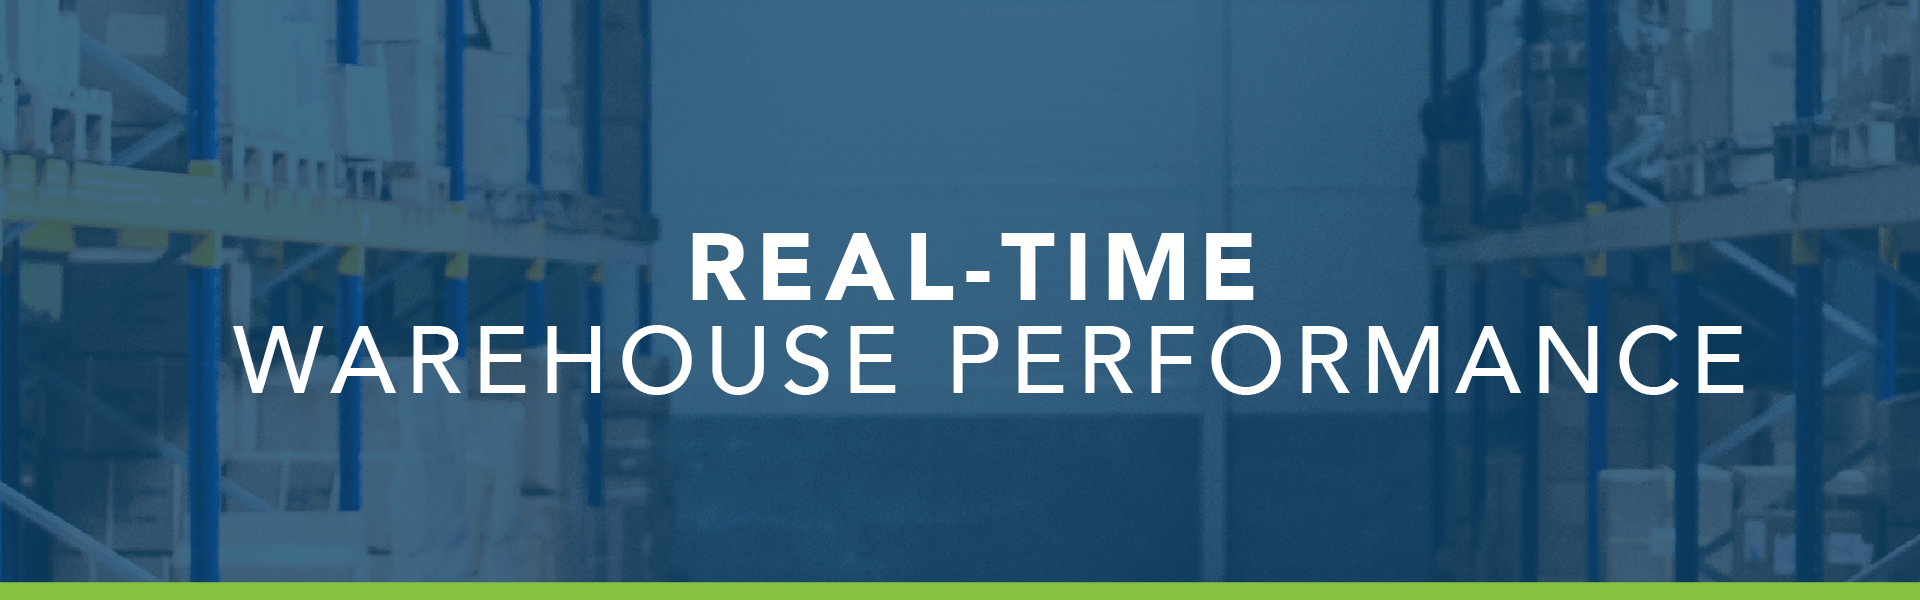 real-time warehouse performance